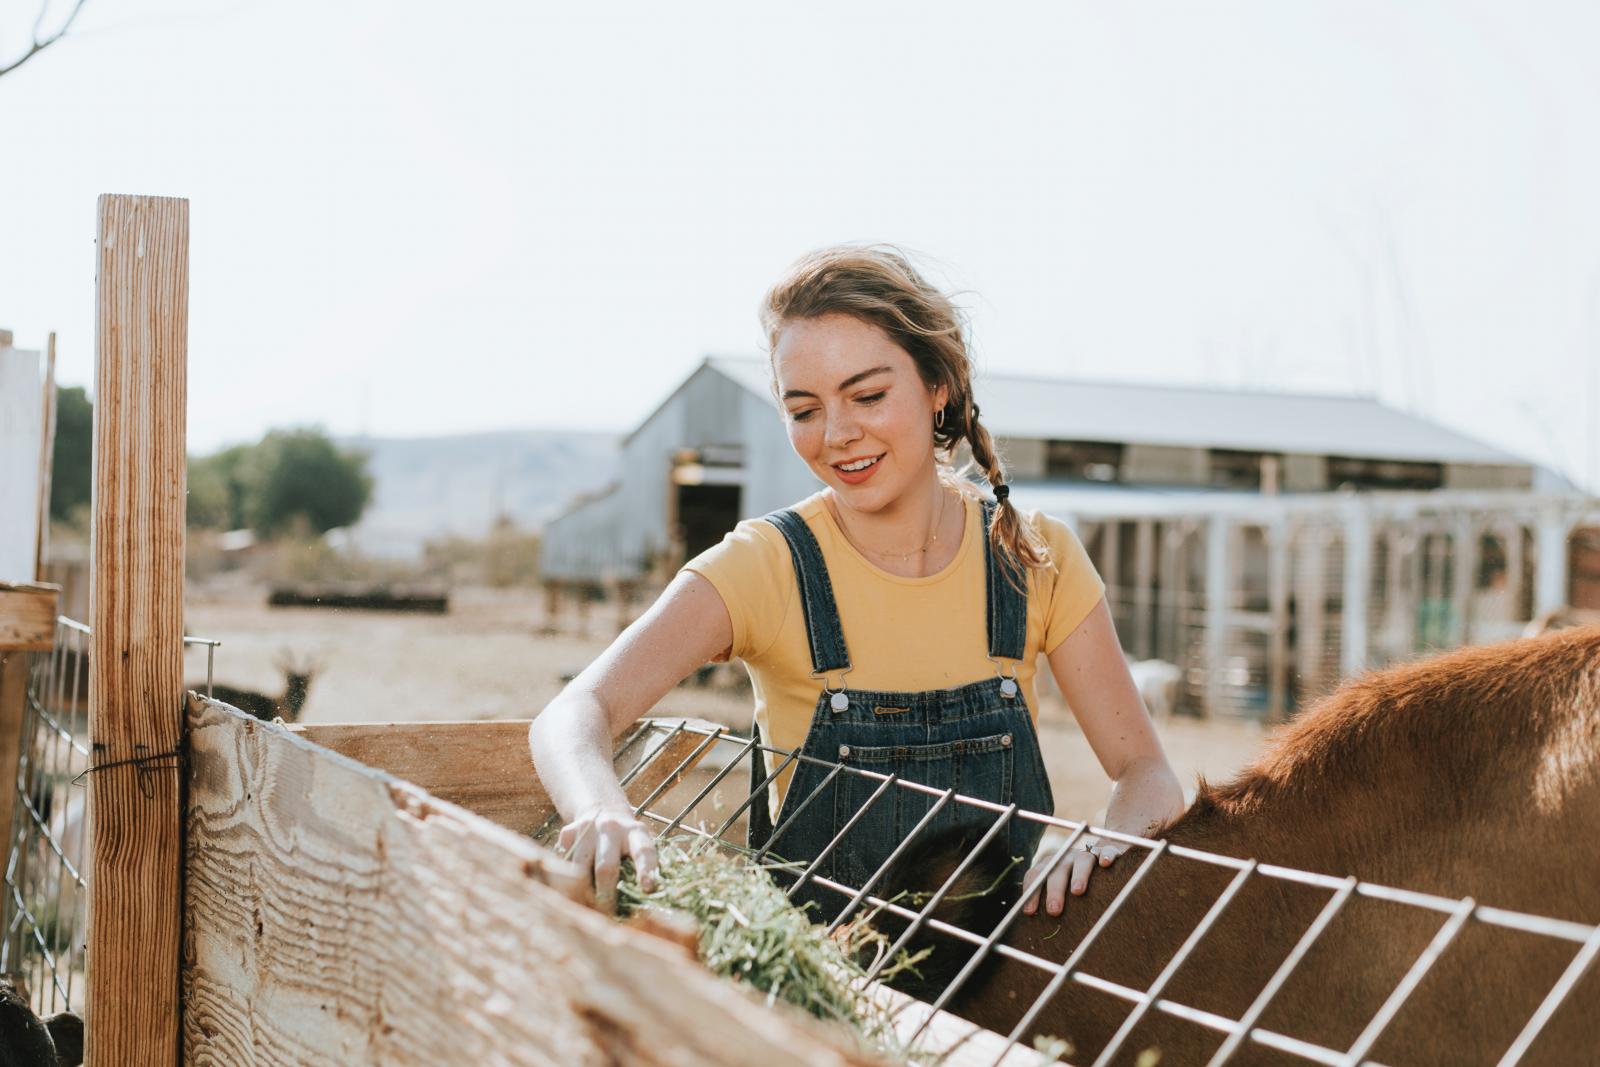 Third of teenagers would consider a career in farming | Sustain